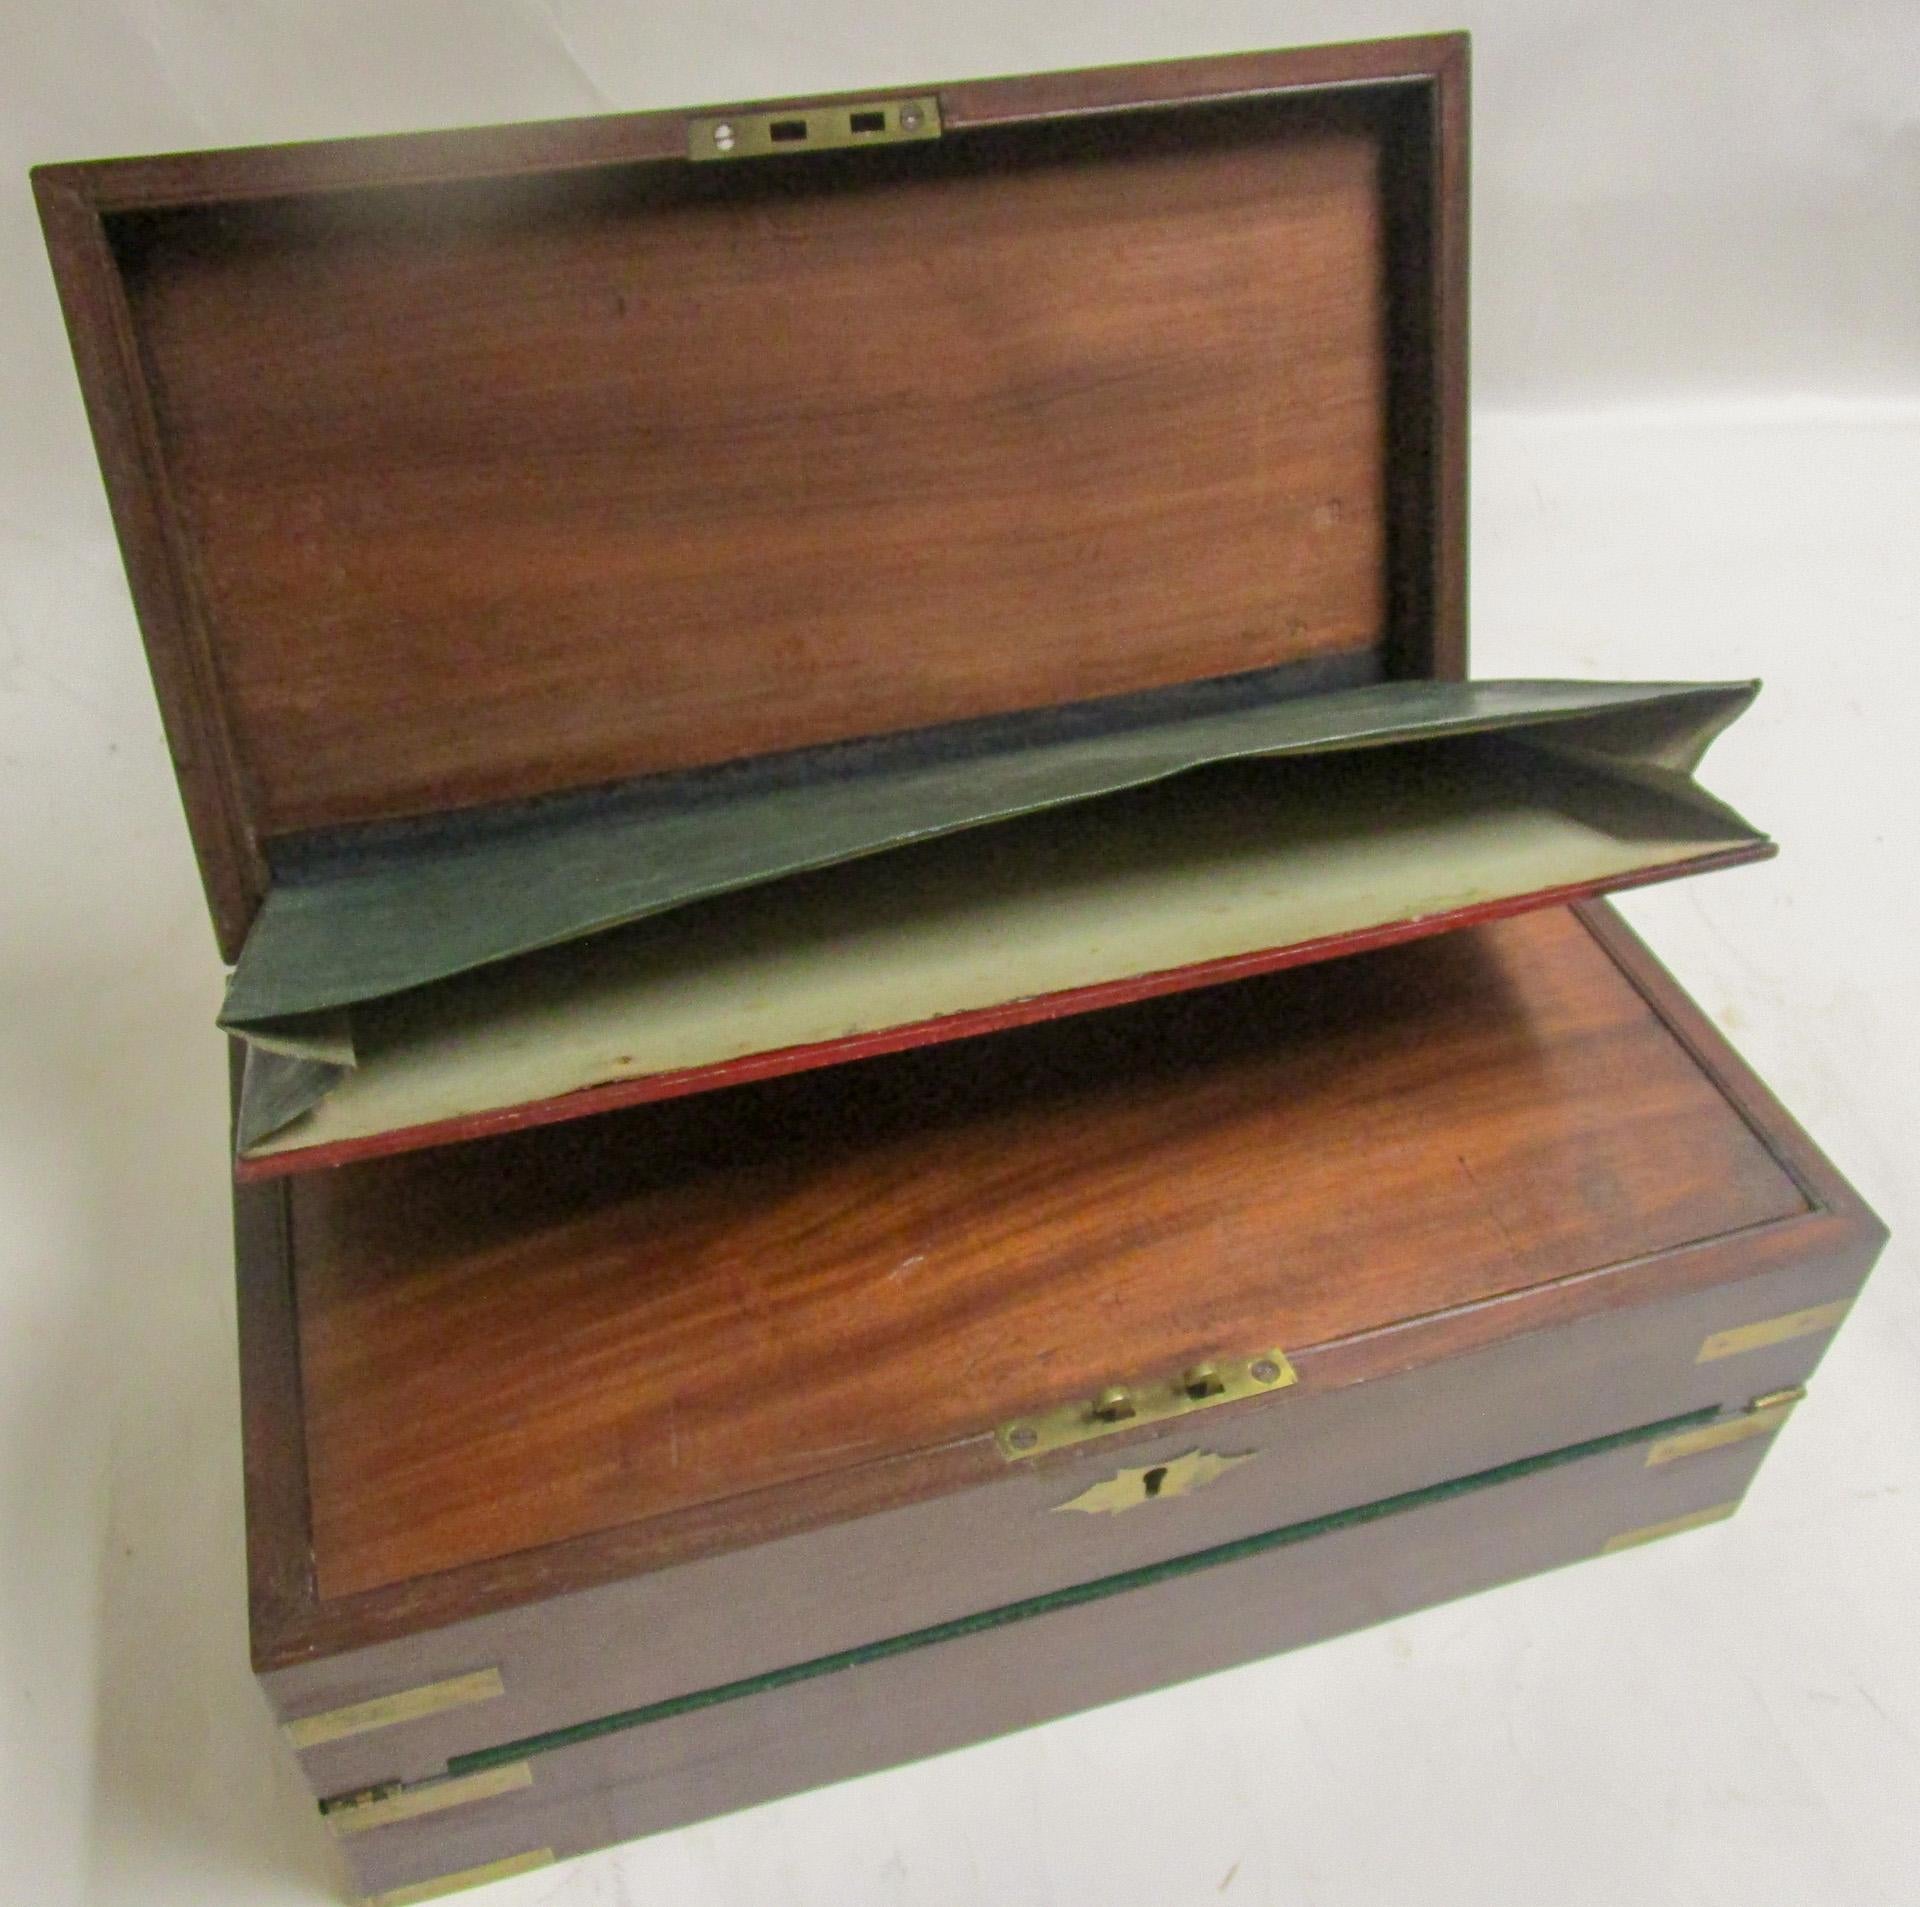 English Regency Mahogany Travelling Lap Desk Box with Secret Compartment For Sale 13